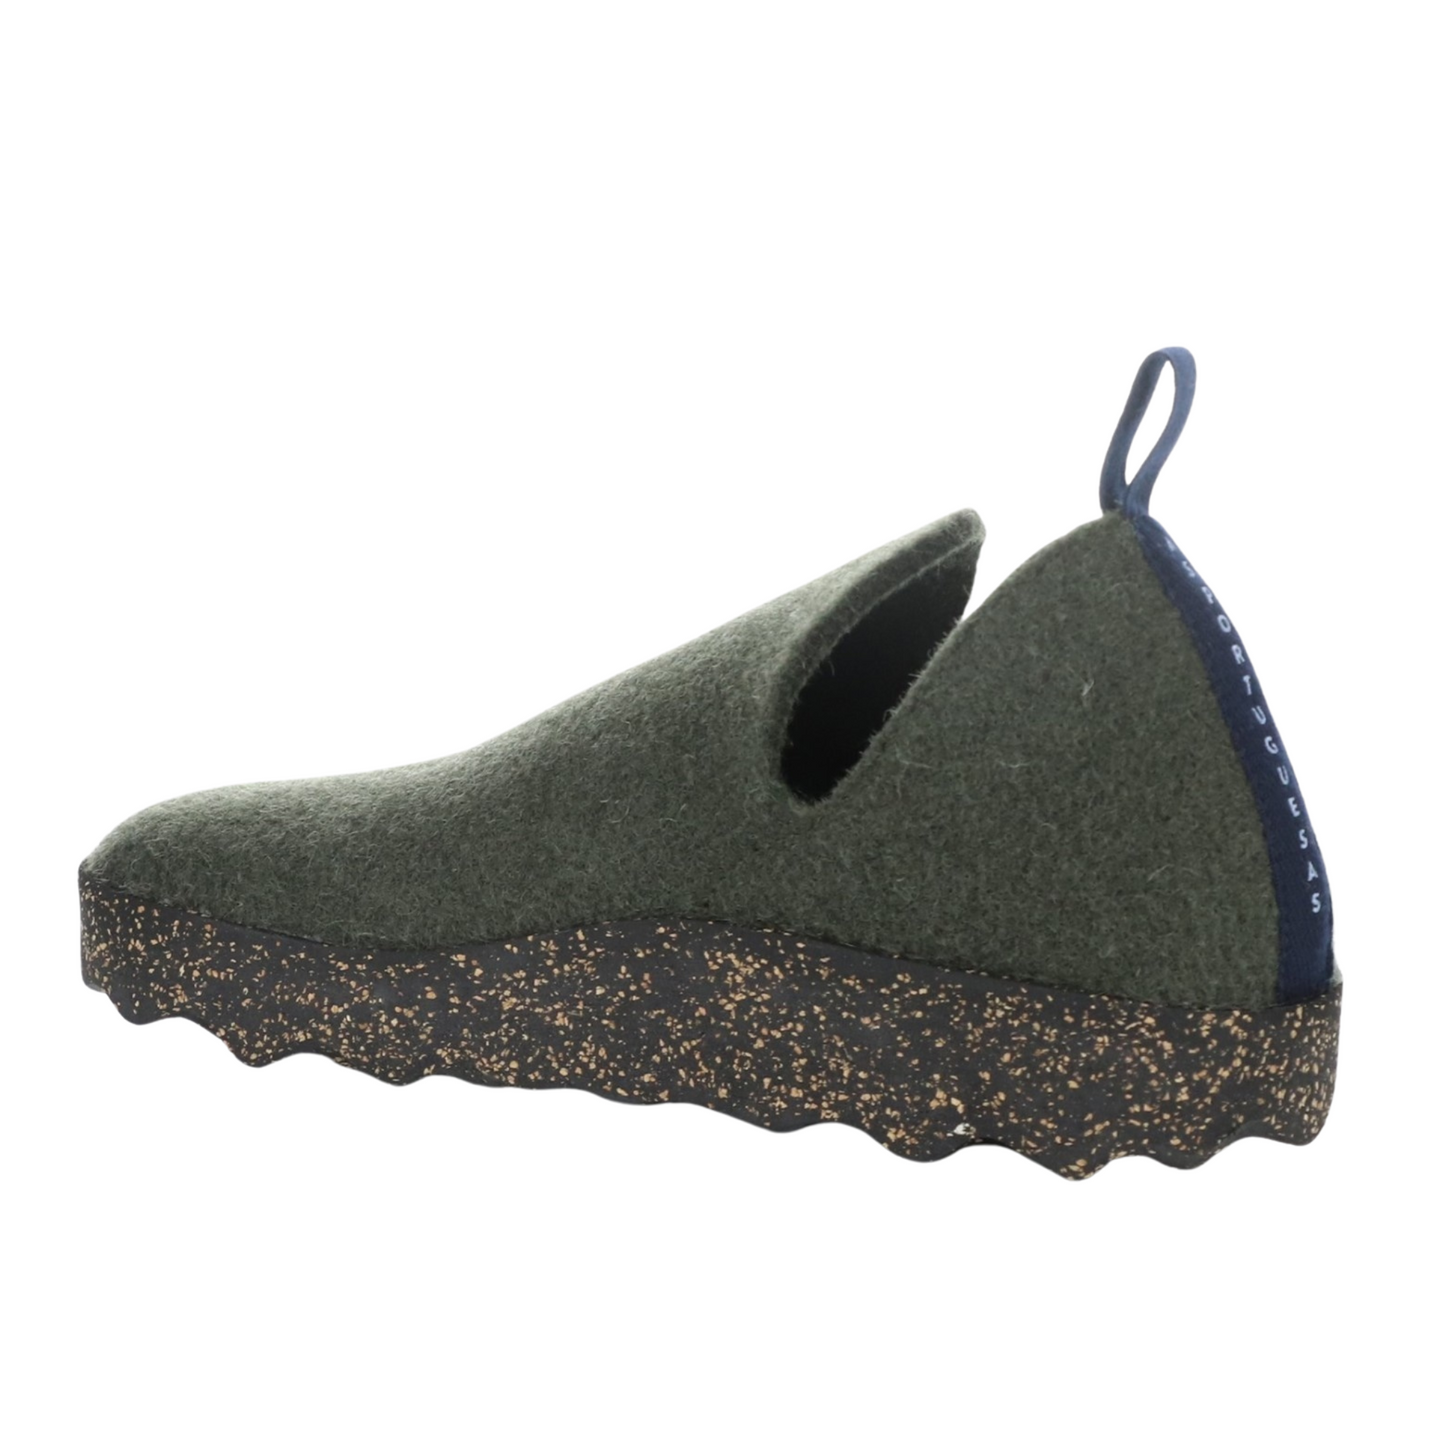 A dark green wool sneaker with oblong cutouts, navy heel tab, and black speckled cork soul is pictured in profile.